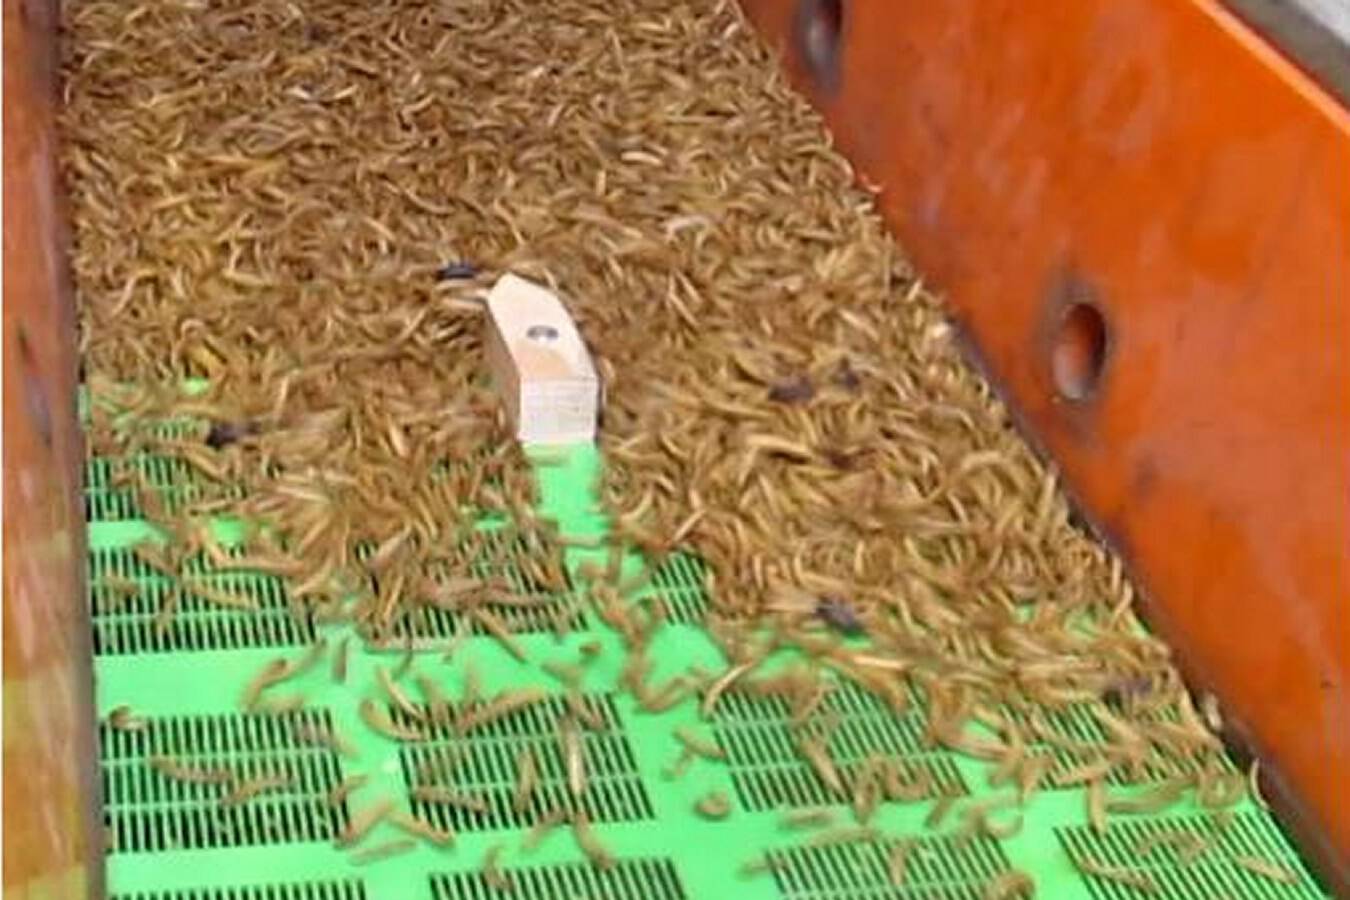 Screening insects as an alternative protein source Insects such as buffalo worms and mealworms are a sought-after source of protein as sustainable feed as well as for a climate-friendly diet. RHEWUM has the technology for gentle sieving of live larvae on an industrial scale.